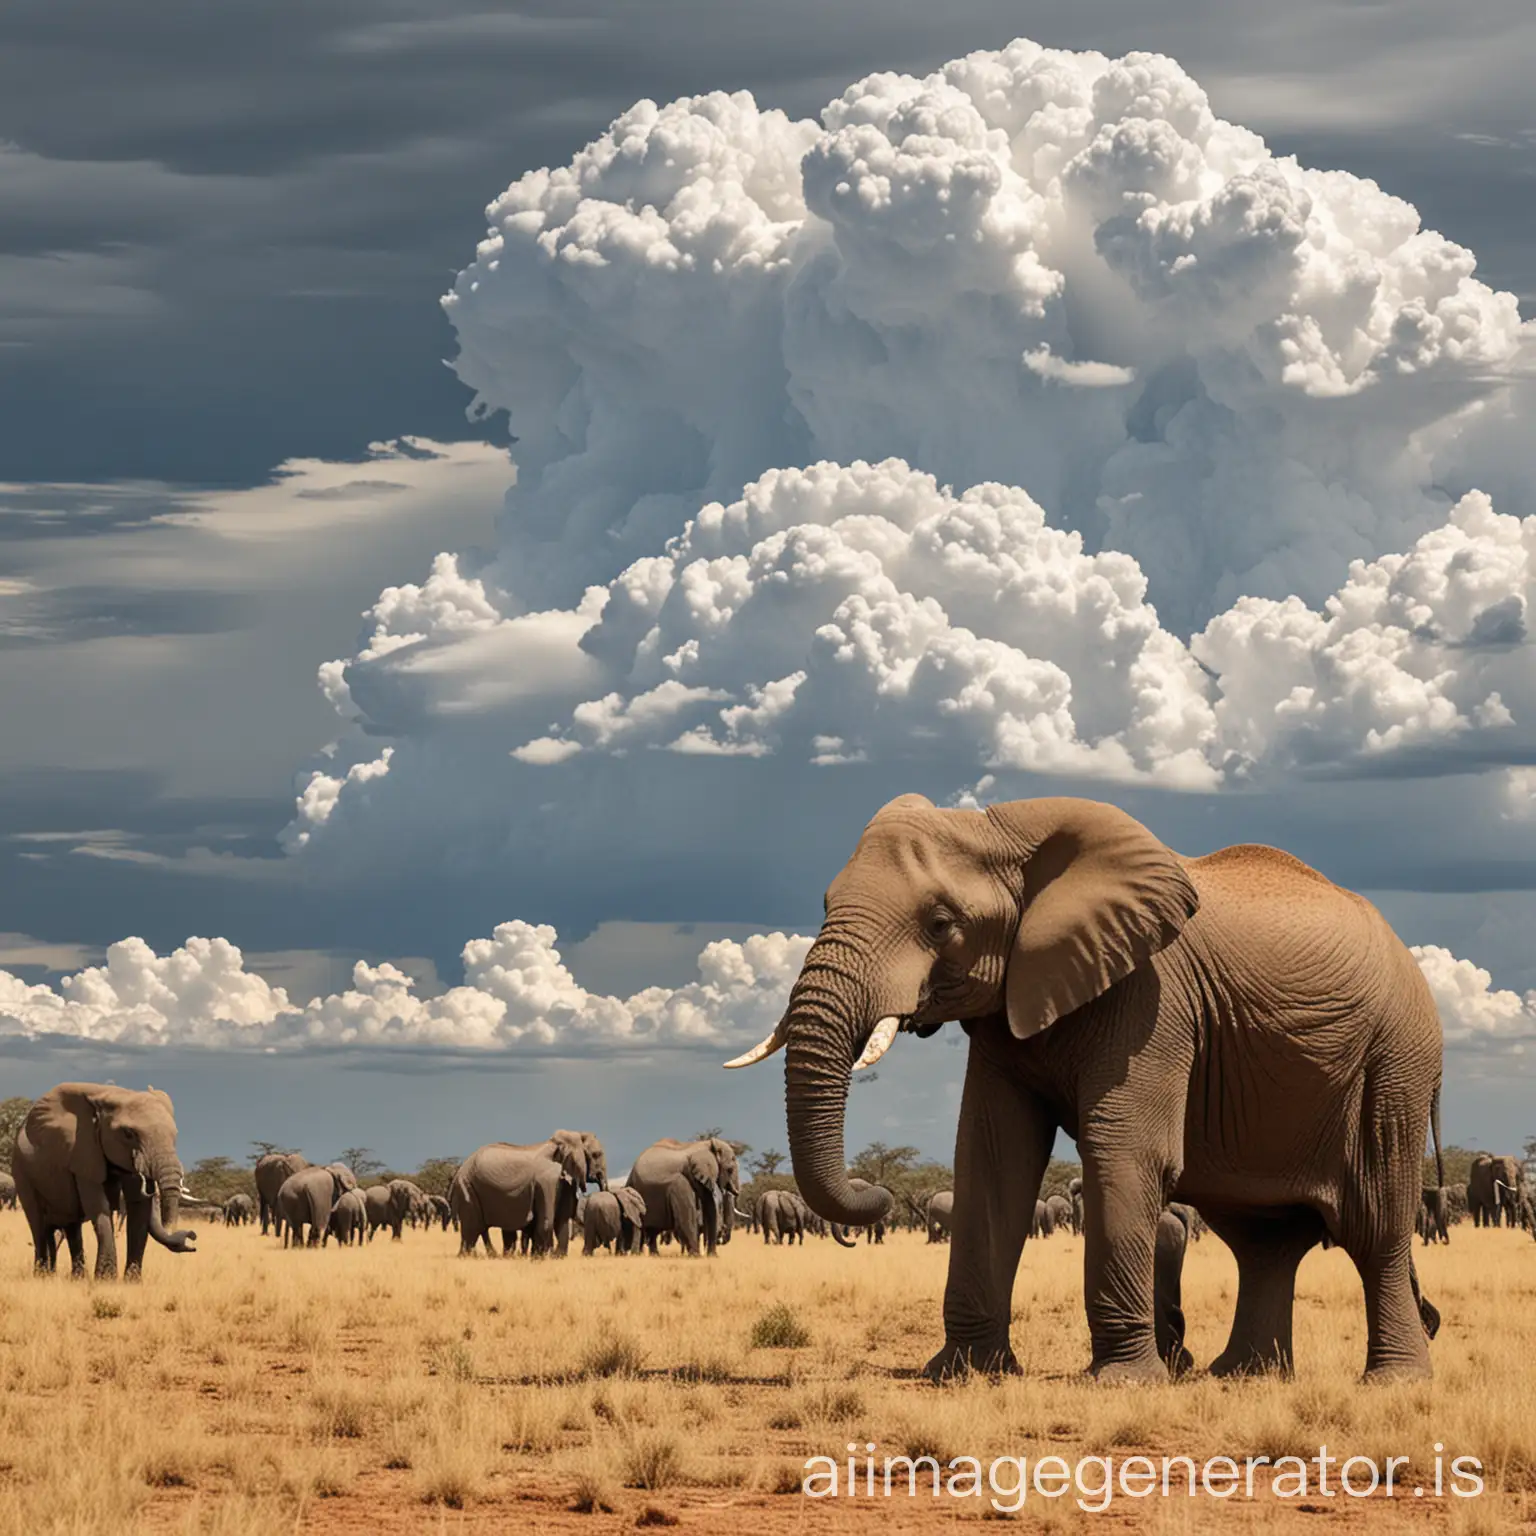 Majestic-Cloudscape-Weight-of-100-Elephants-in-the-Sky